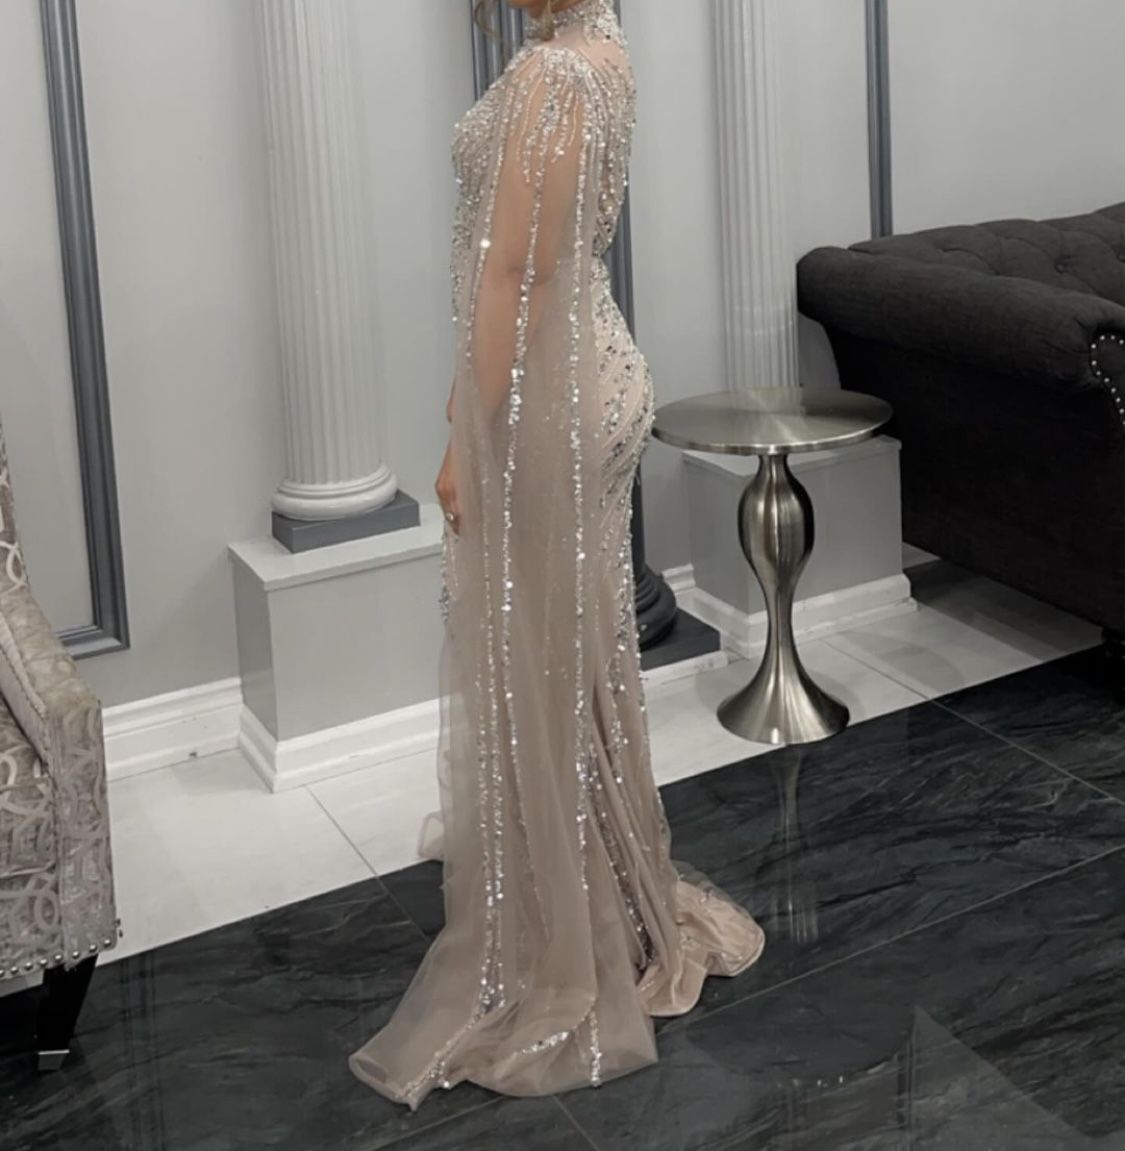 Beautiful Gown Originally $800  Like New Condition